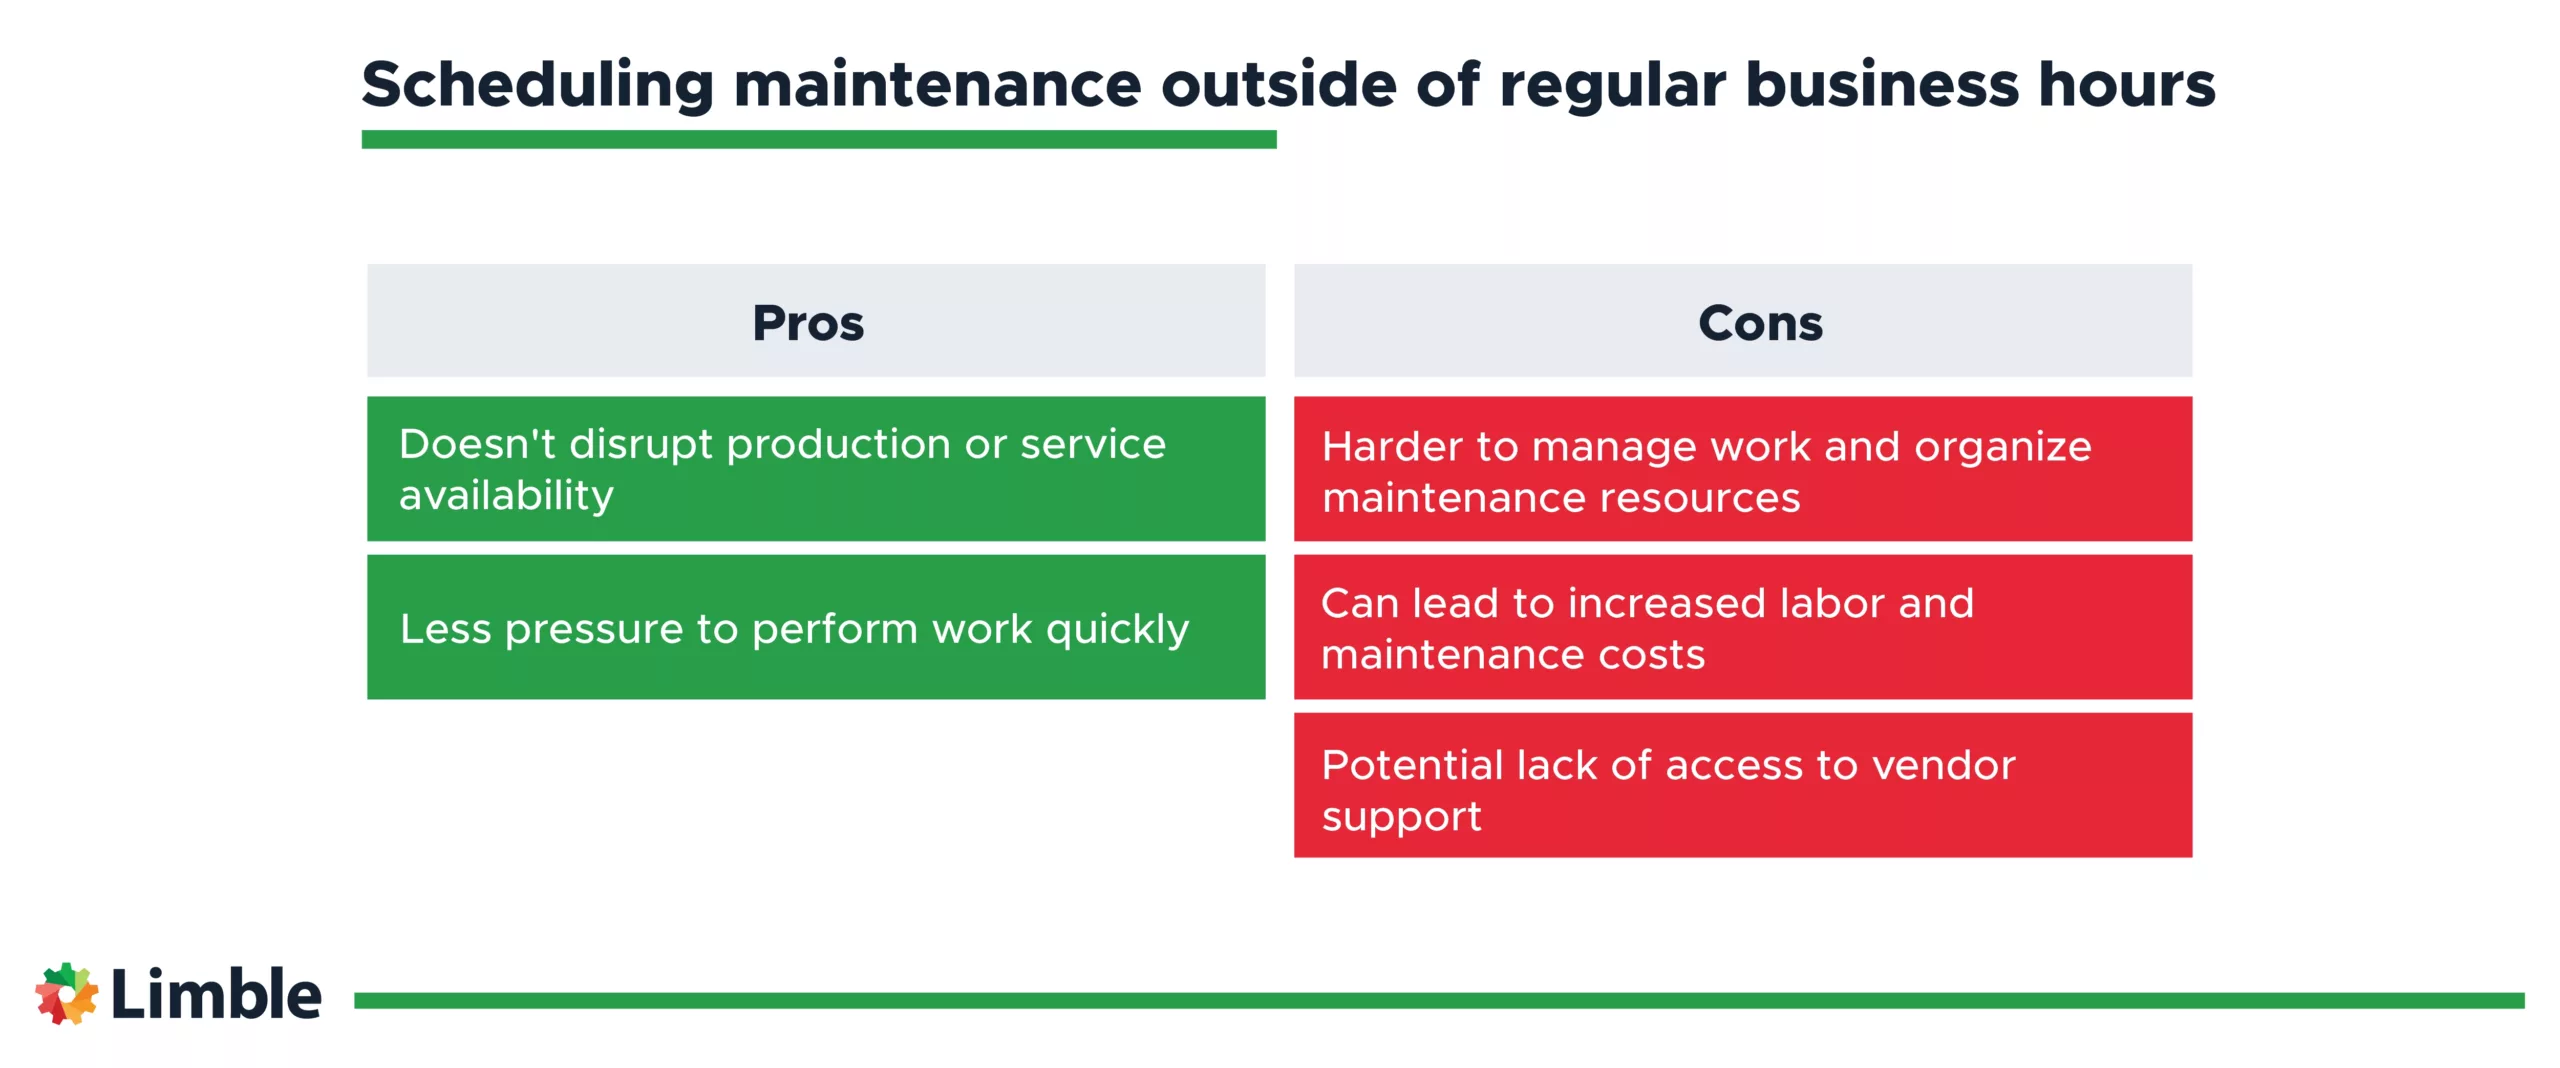 Pros and cons of scheduling maintenance windows outside of regular business hours.